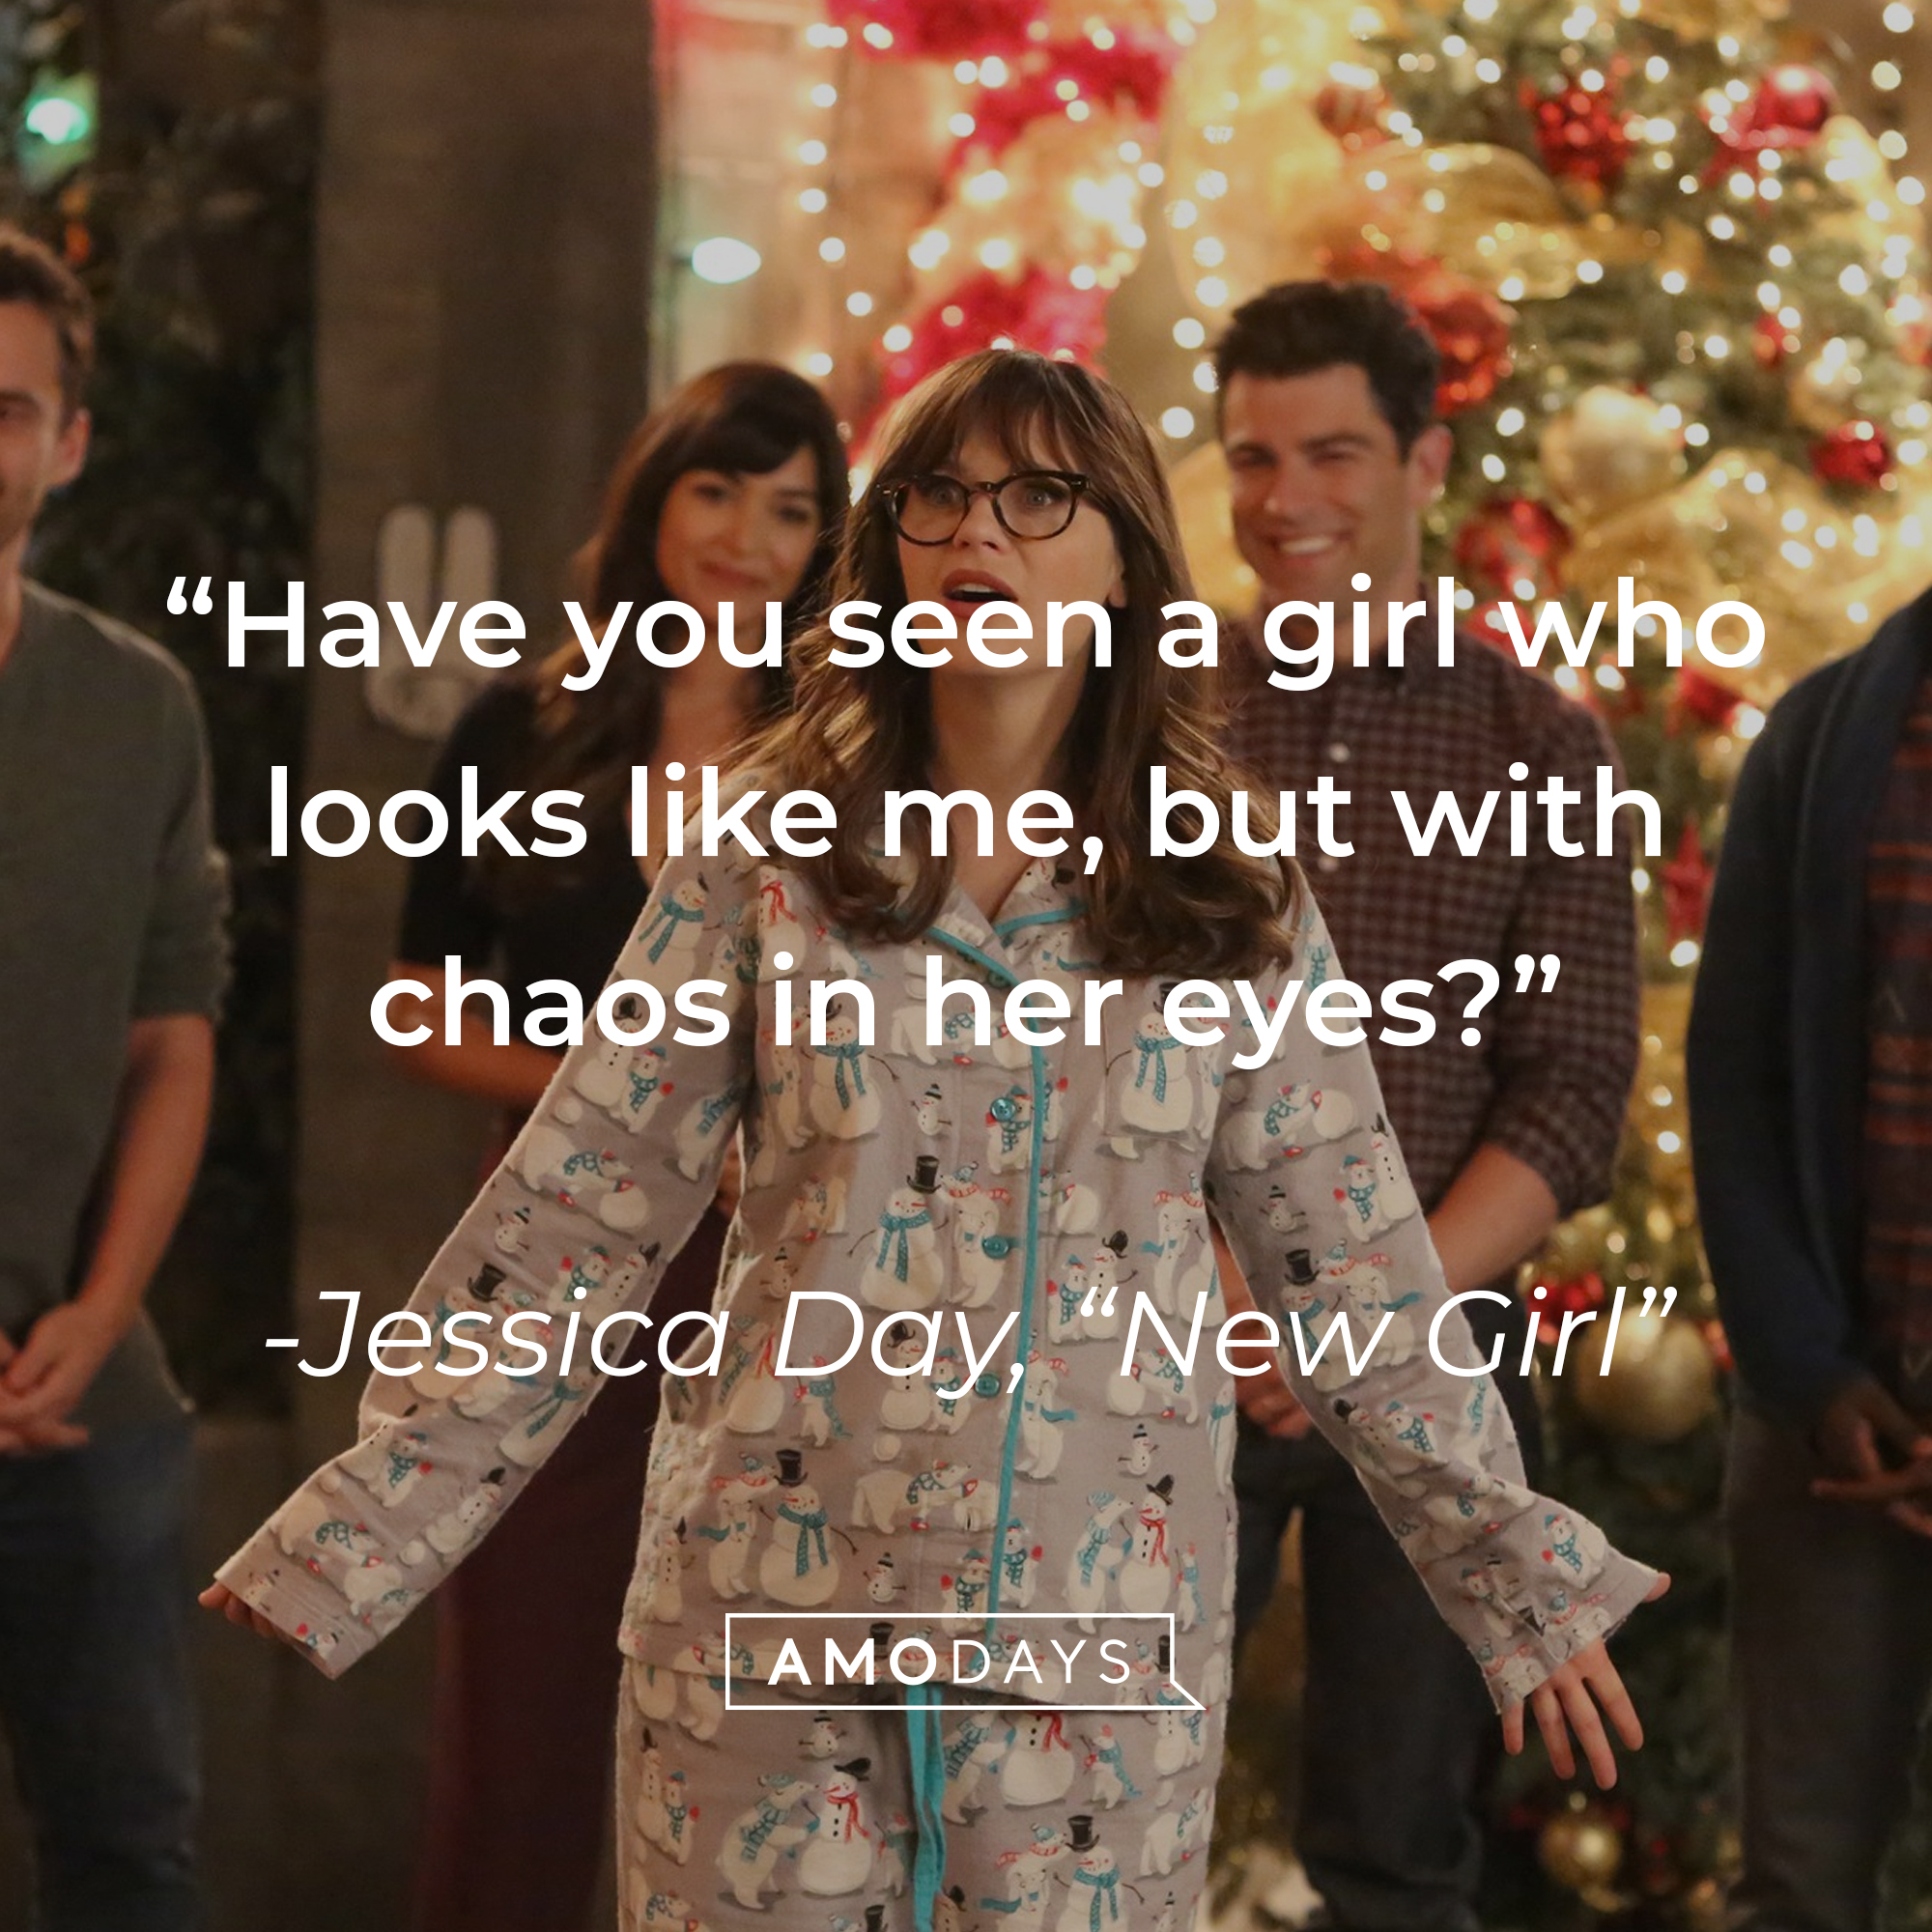 Jessica Day’s quote from “New Girl”: “Have you seen a girl who looks like me, but with chaos in her eyes?” | Source: facebook.com/OfficialNewGirl